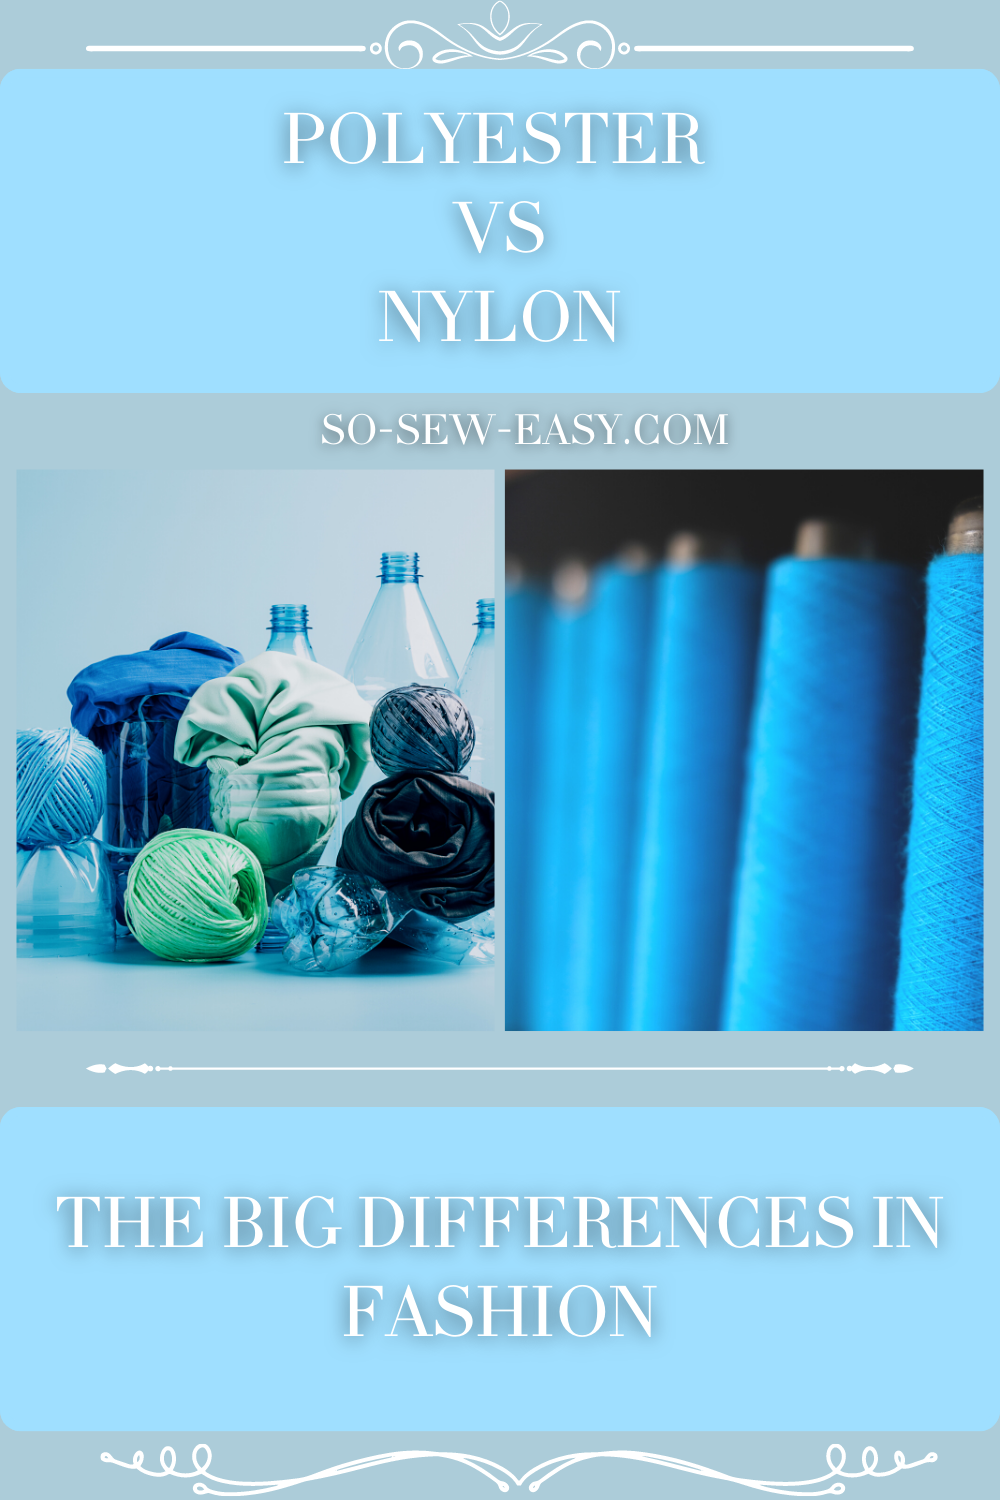 Polyester Vs. Nylon - What's The Difference In Fashion?